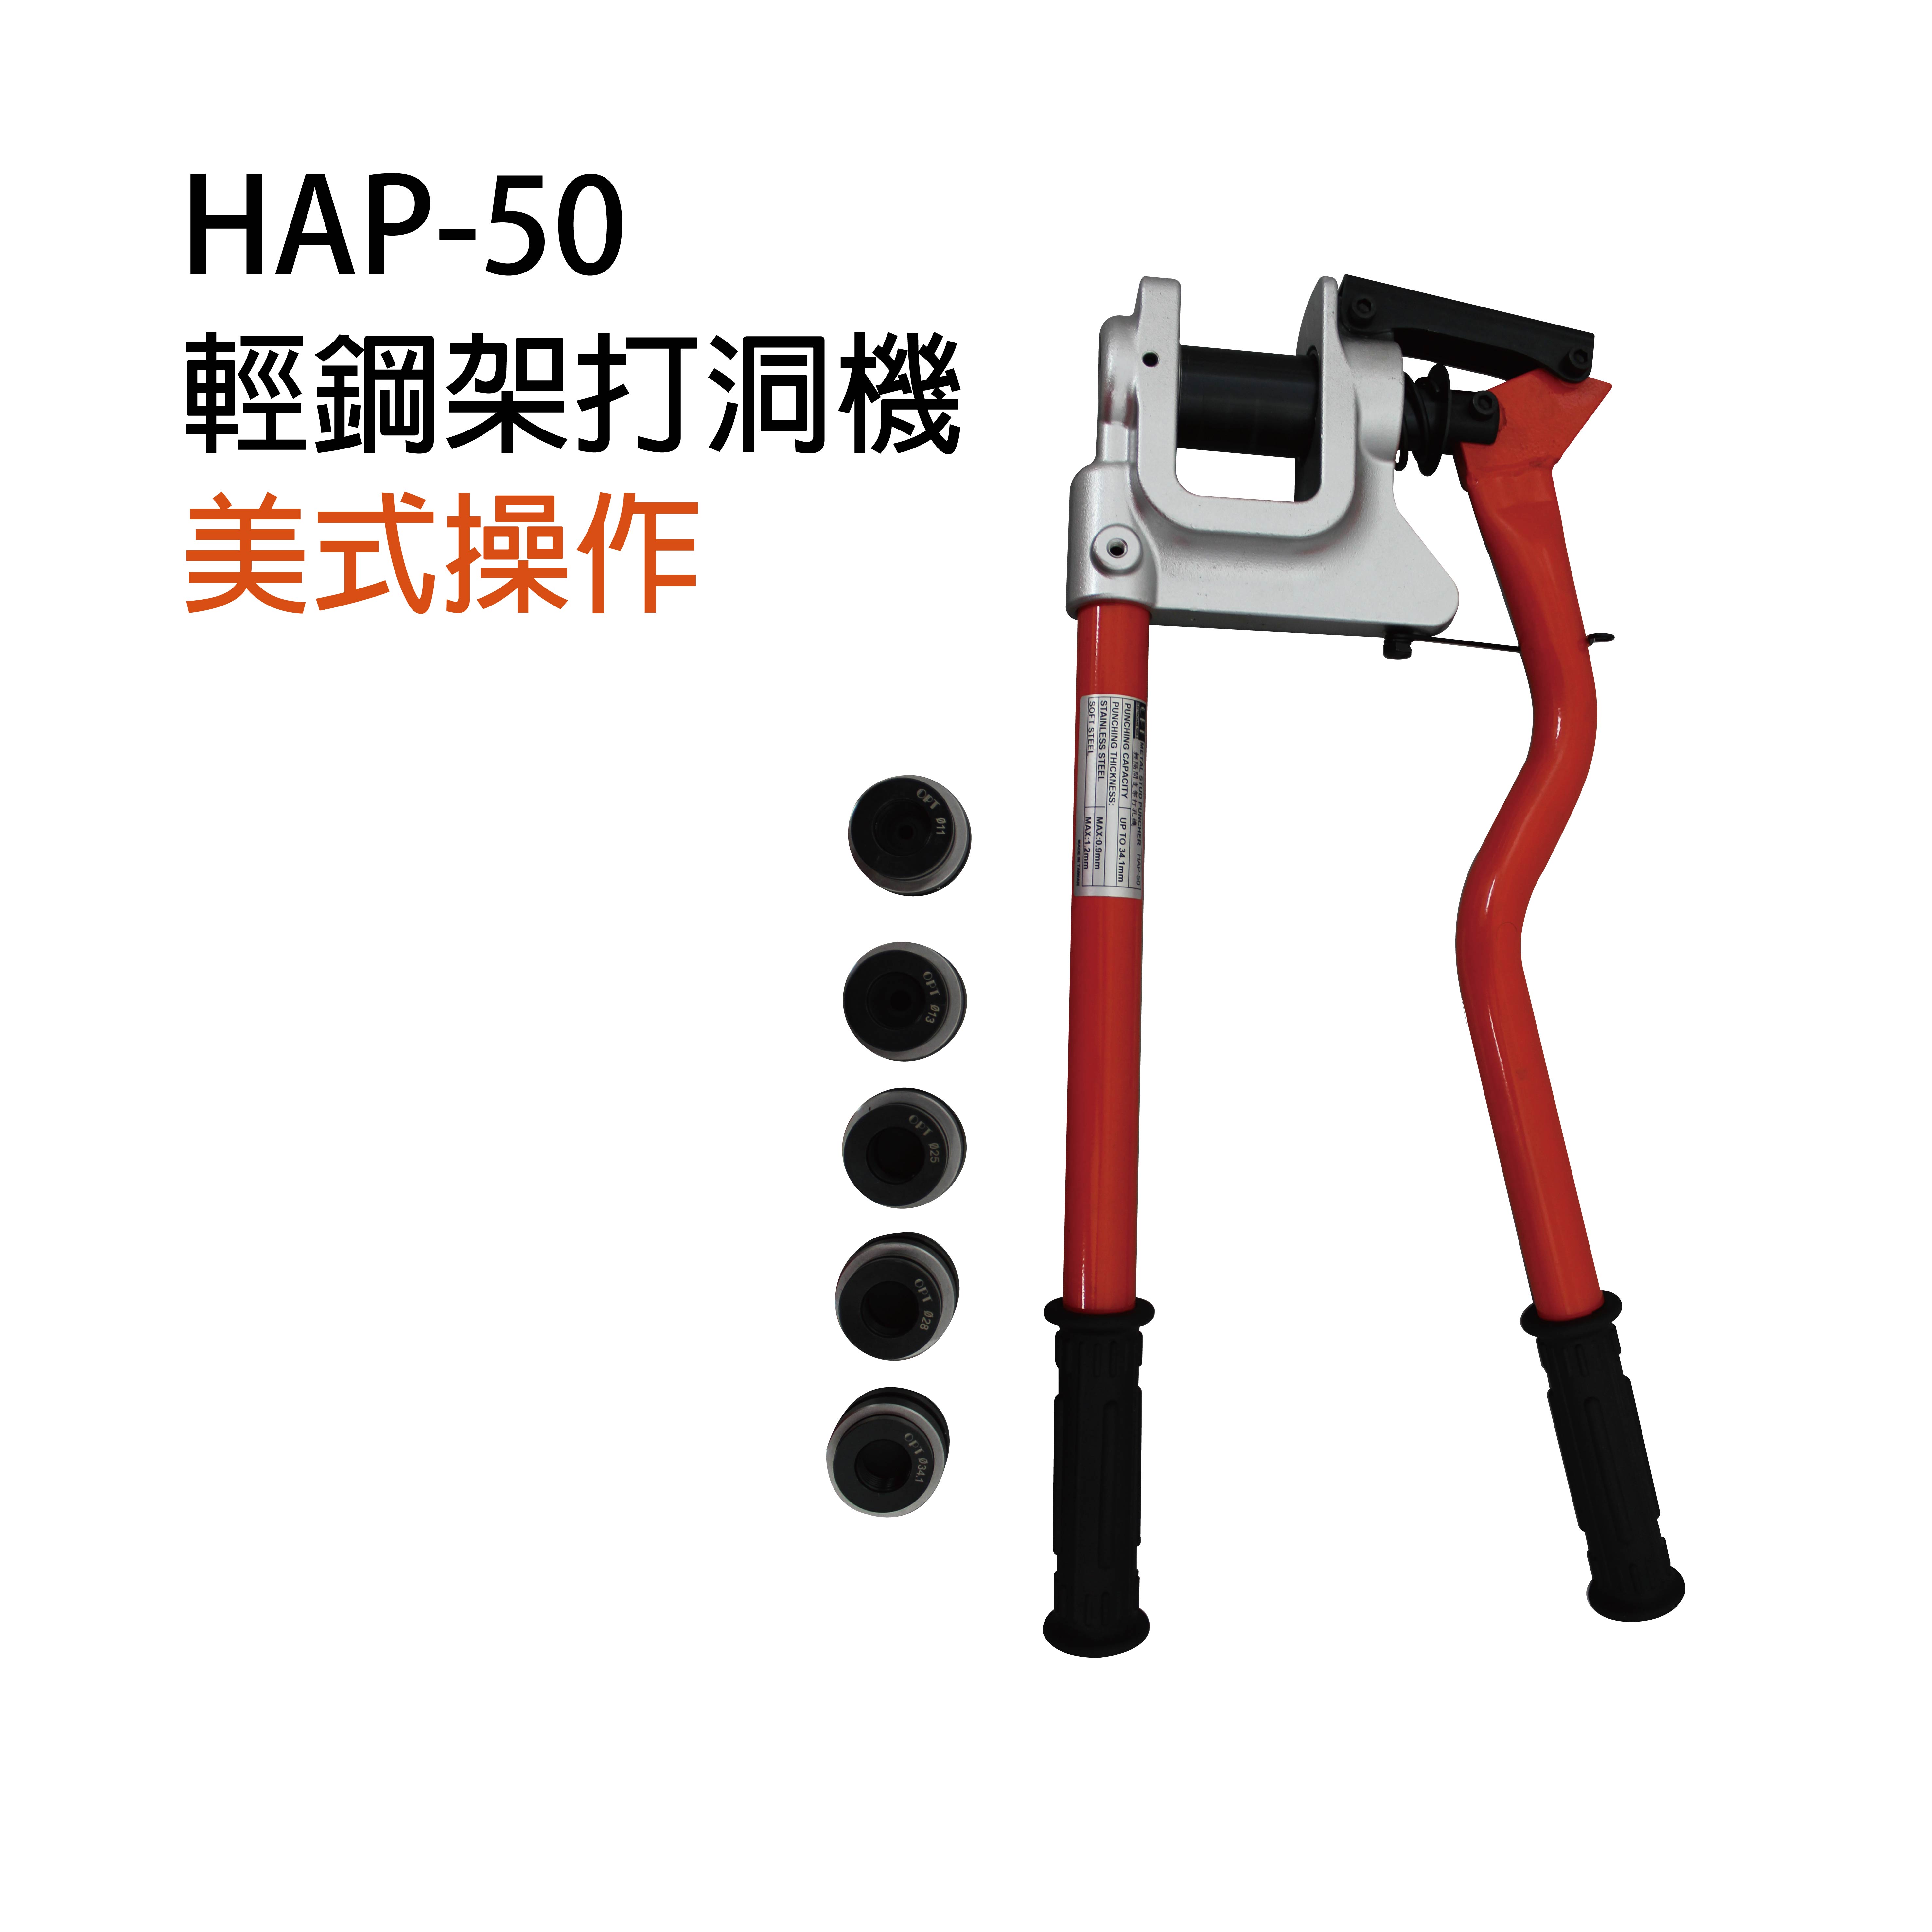 HAP-50 MANUAL PUNCHER FOR T-BARS AND LIGHT FRAMES